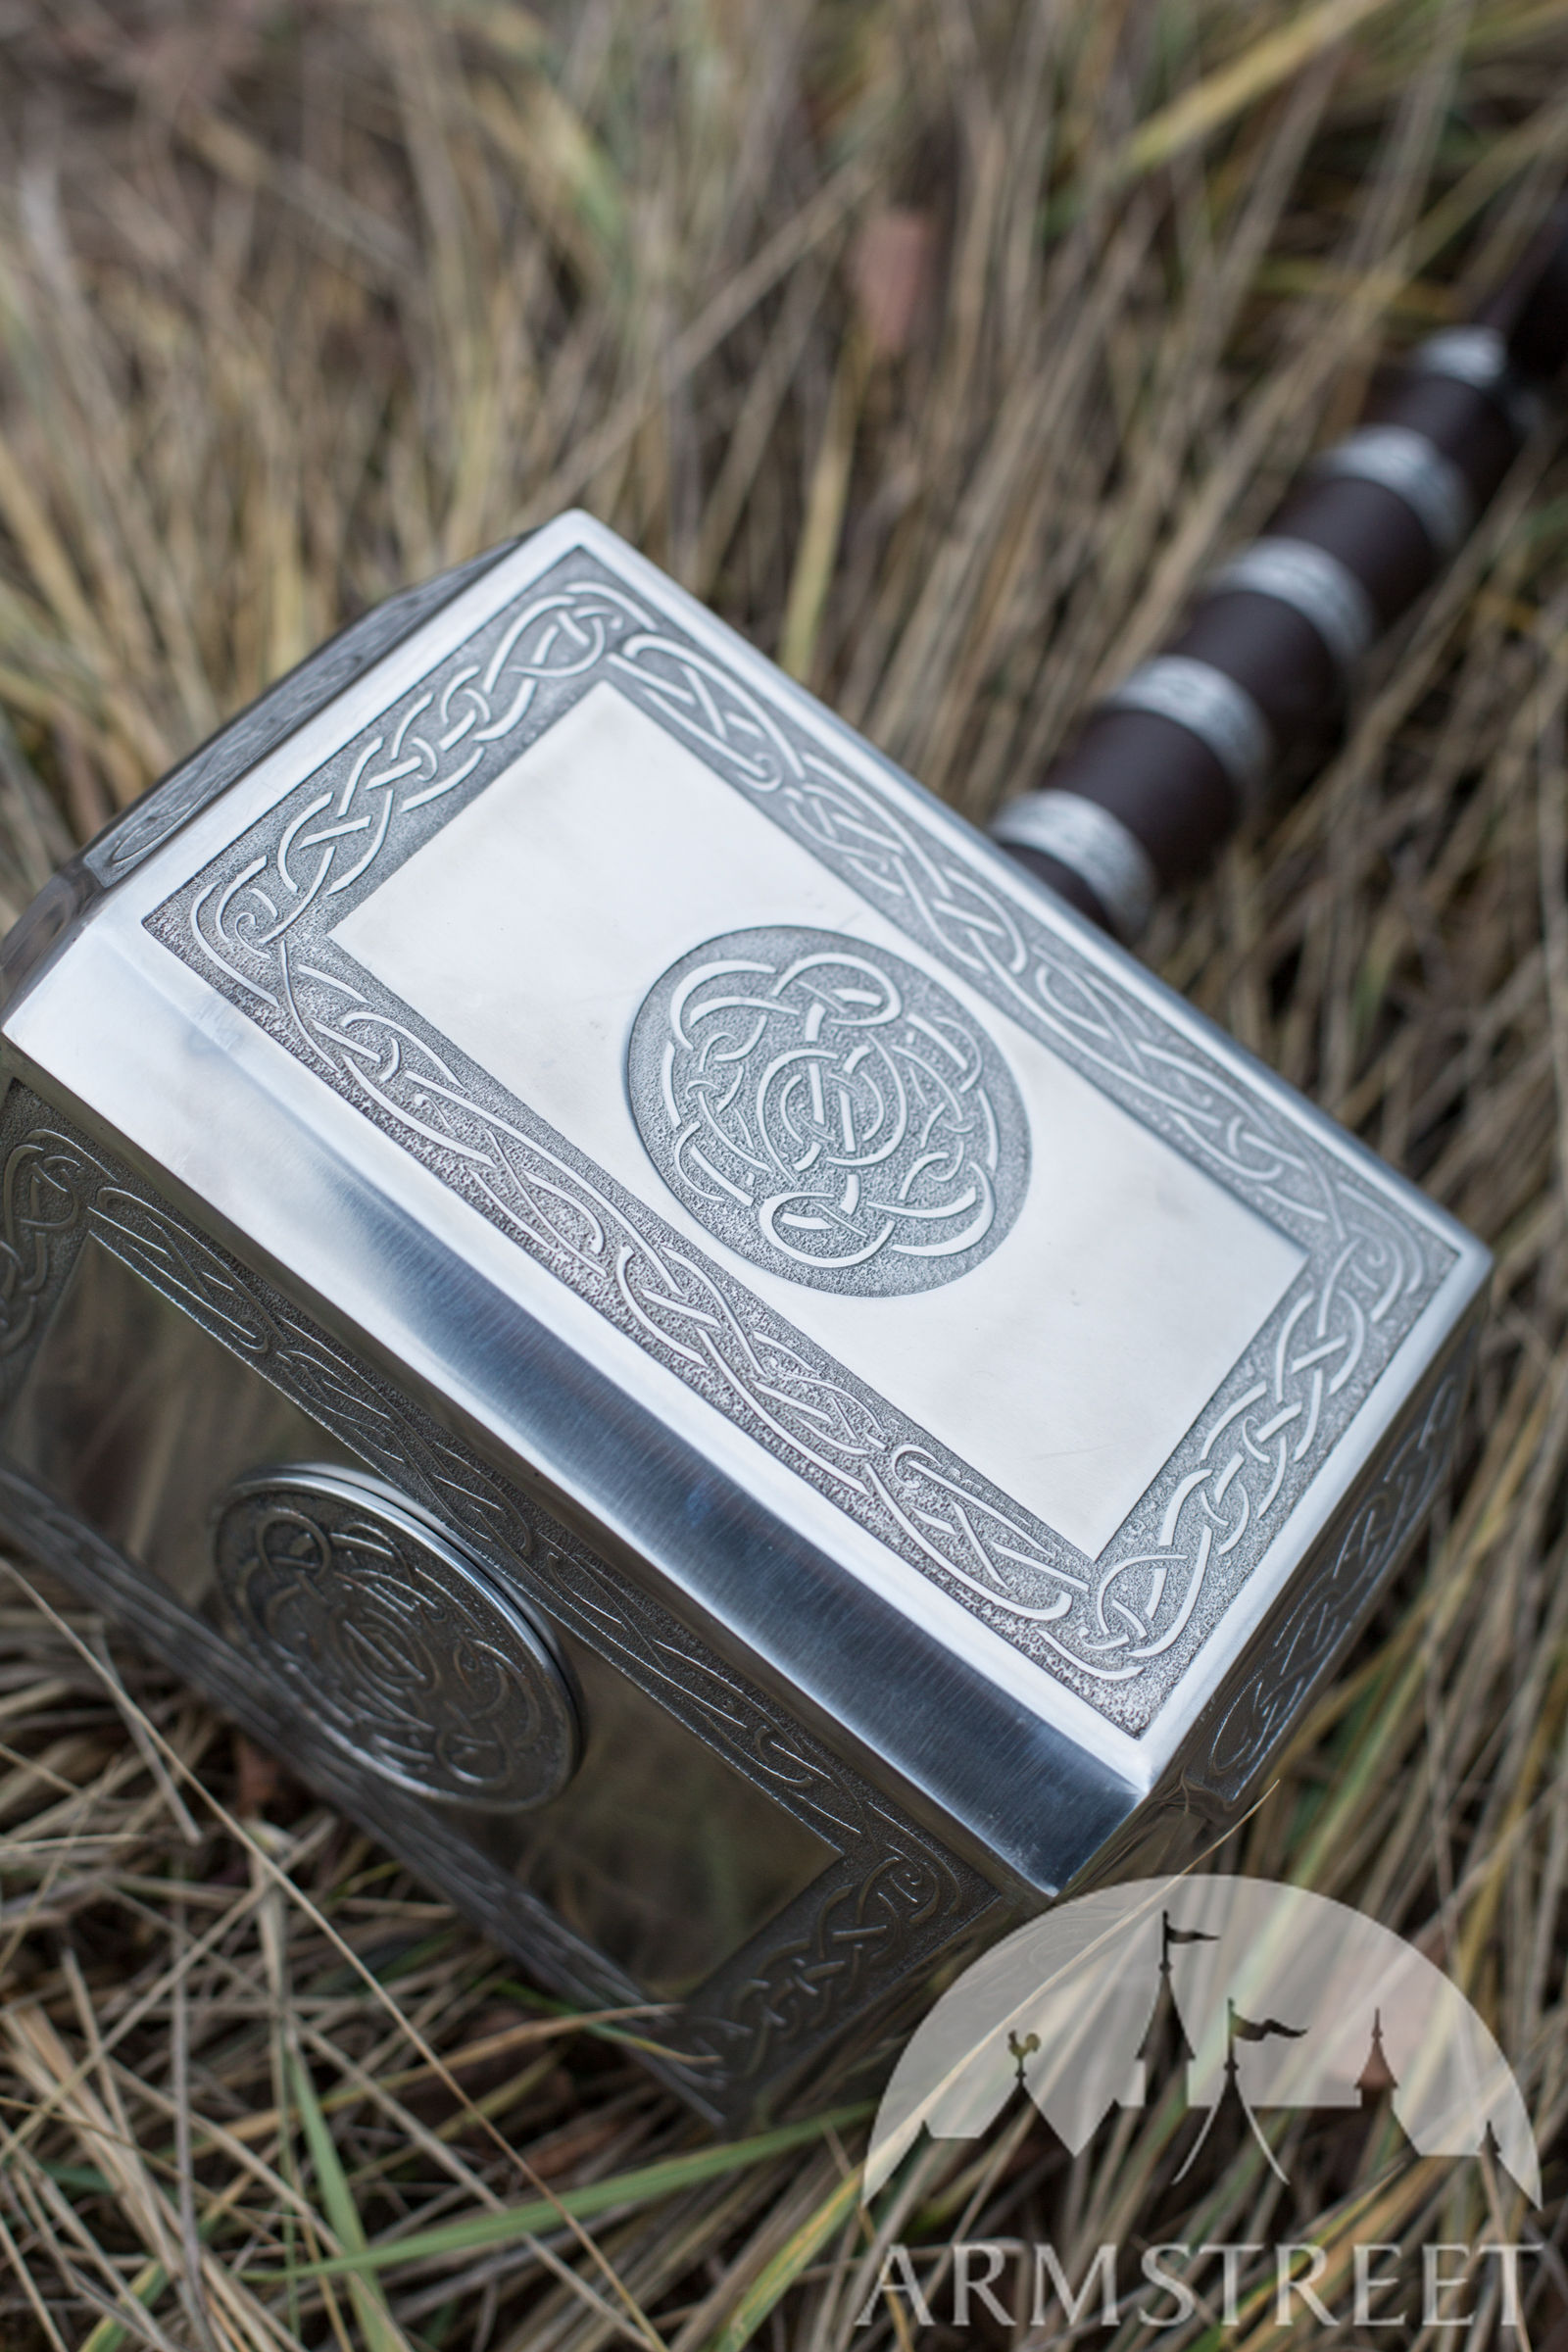 Viking Hammer Mjolnir by ArmStreet for sale. Available in: stainless